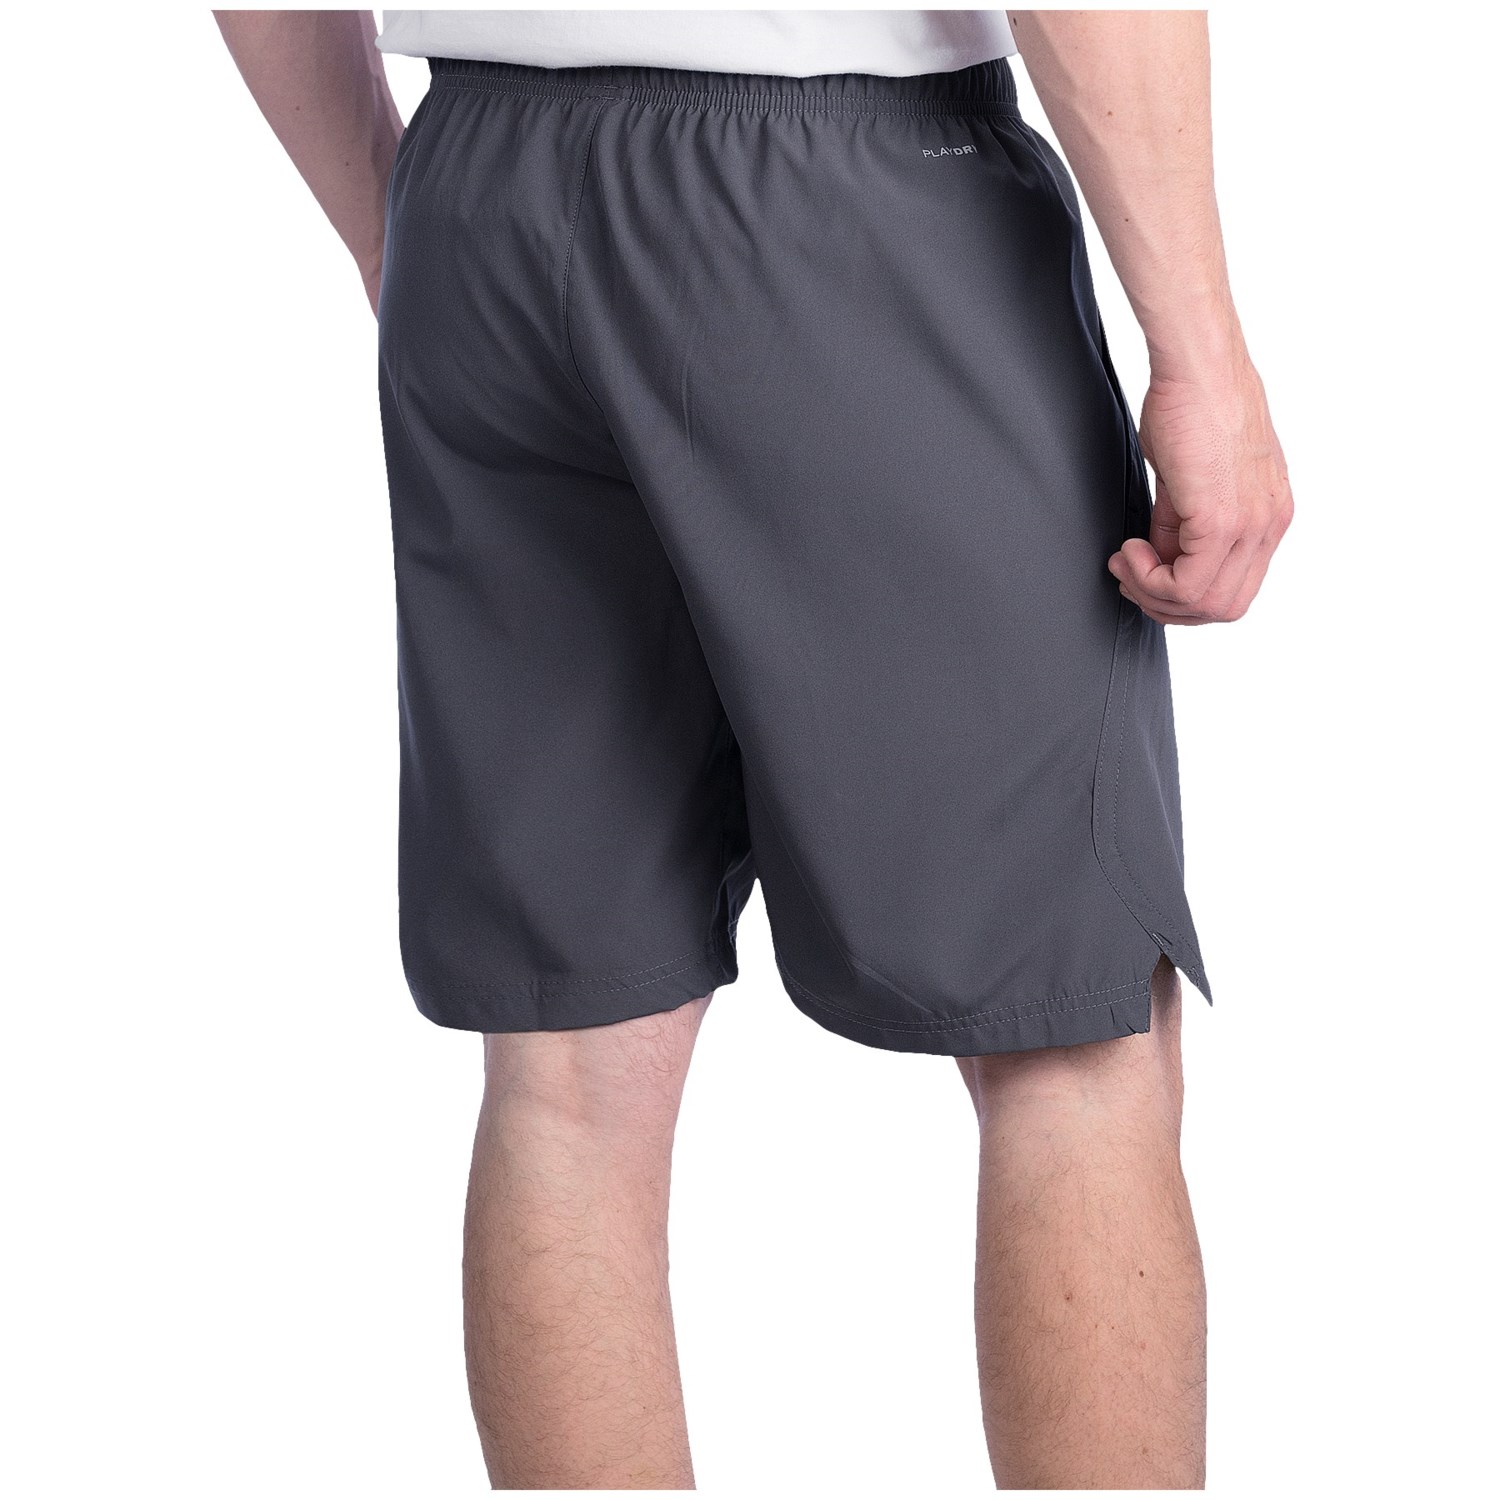 Reebok DST Shorts (For Men) 8320W - Save 37%